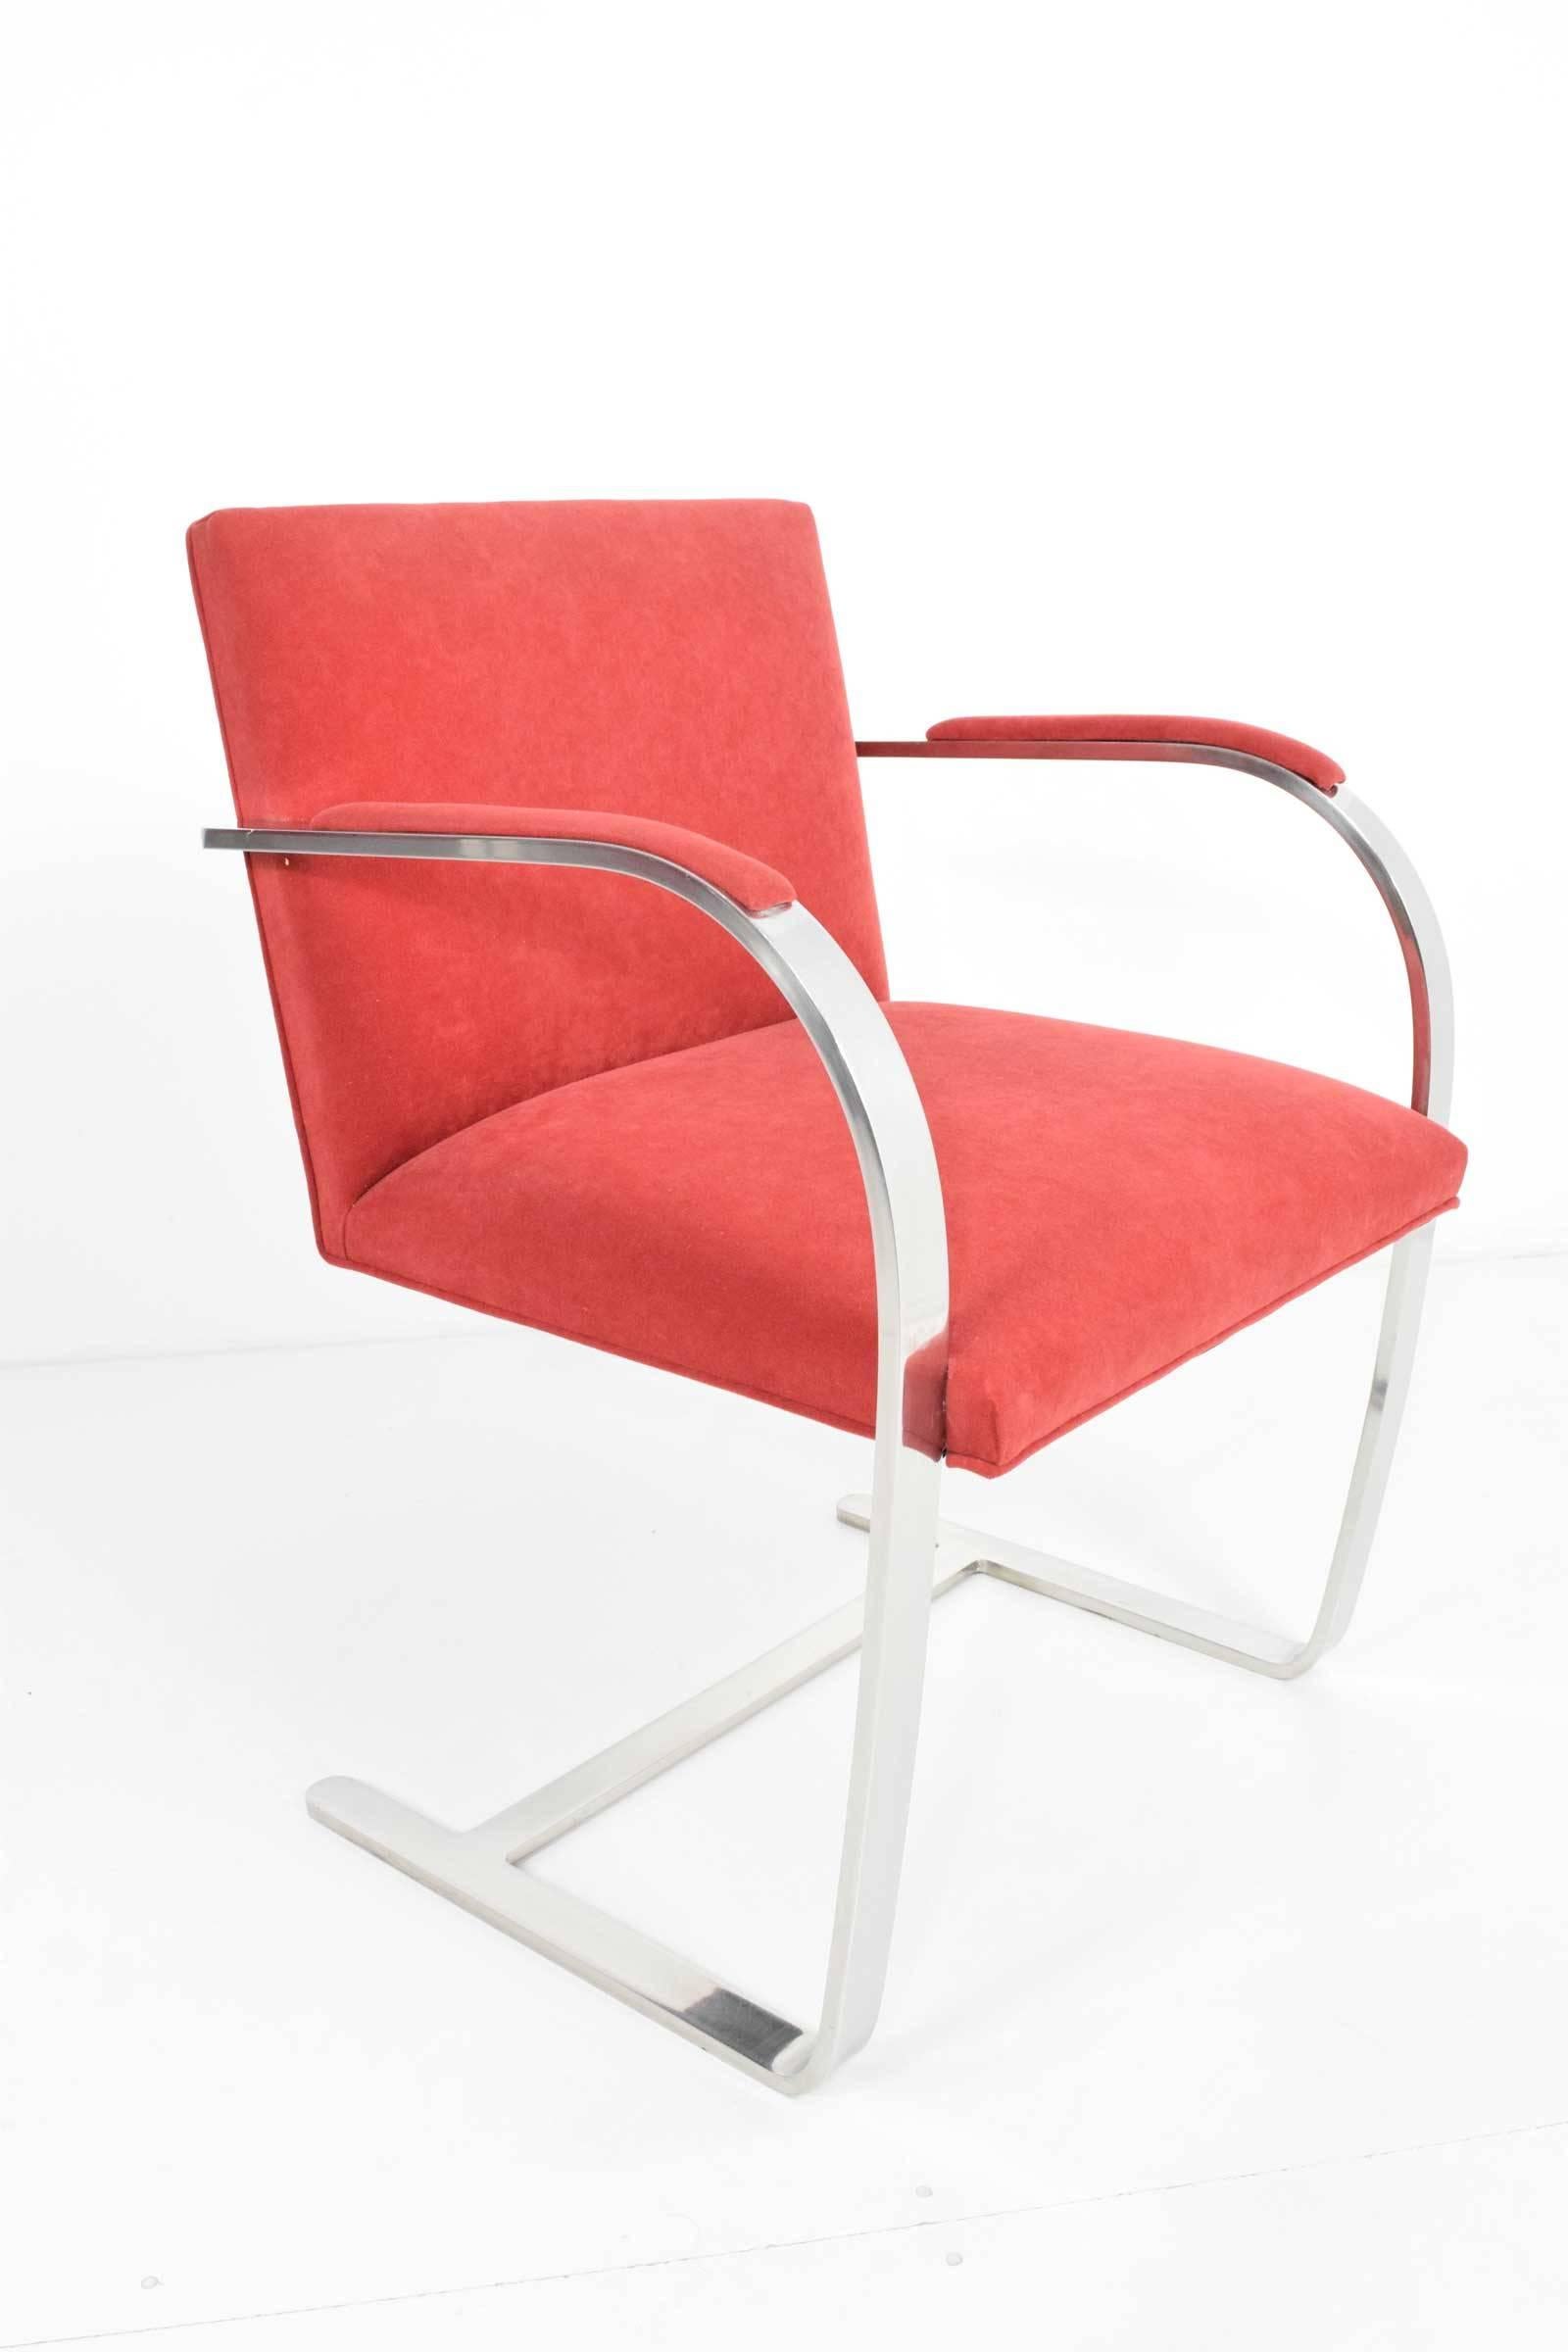 Set of six flat bar Brno chairs by Mies van der Rohe for Knoll. Chairs have a red suede type fabric which is on nice condition. Chairs have arm pads. Stainless steel frames in nice condition but with some scratches and scuffs from use. These can be